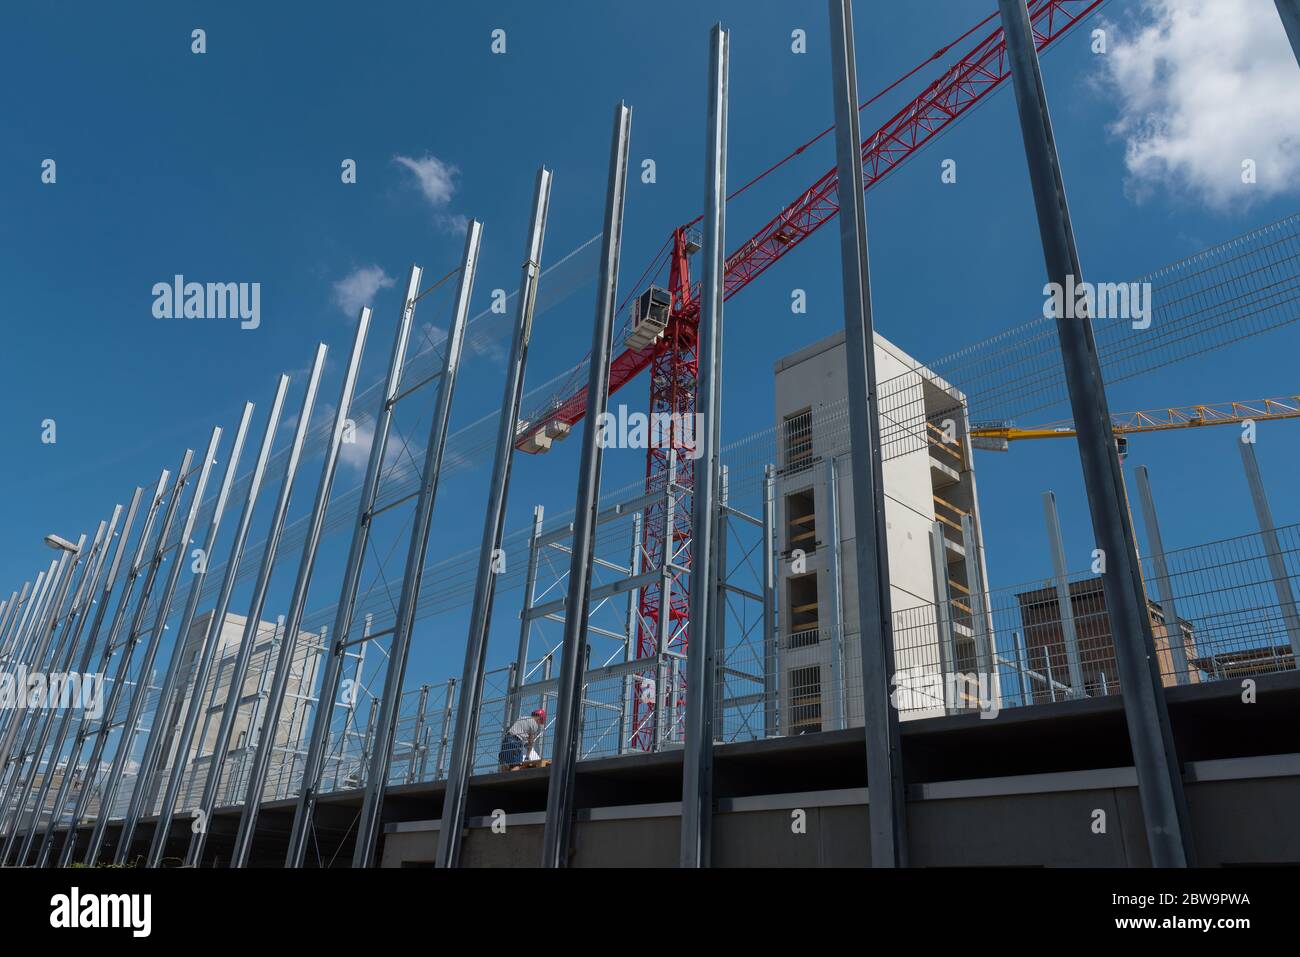 Construction site of a multi-storey car park on a former factory site, Hattersheim, Hesse, Germany Stock Photo